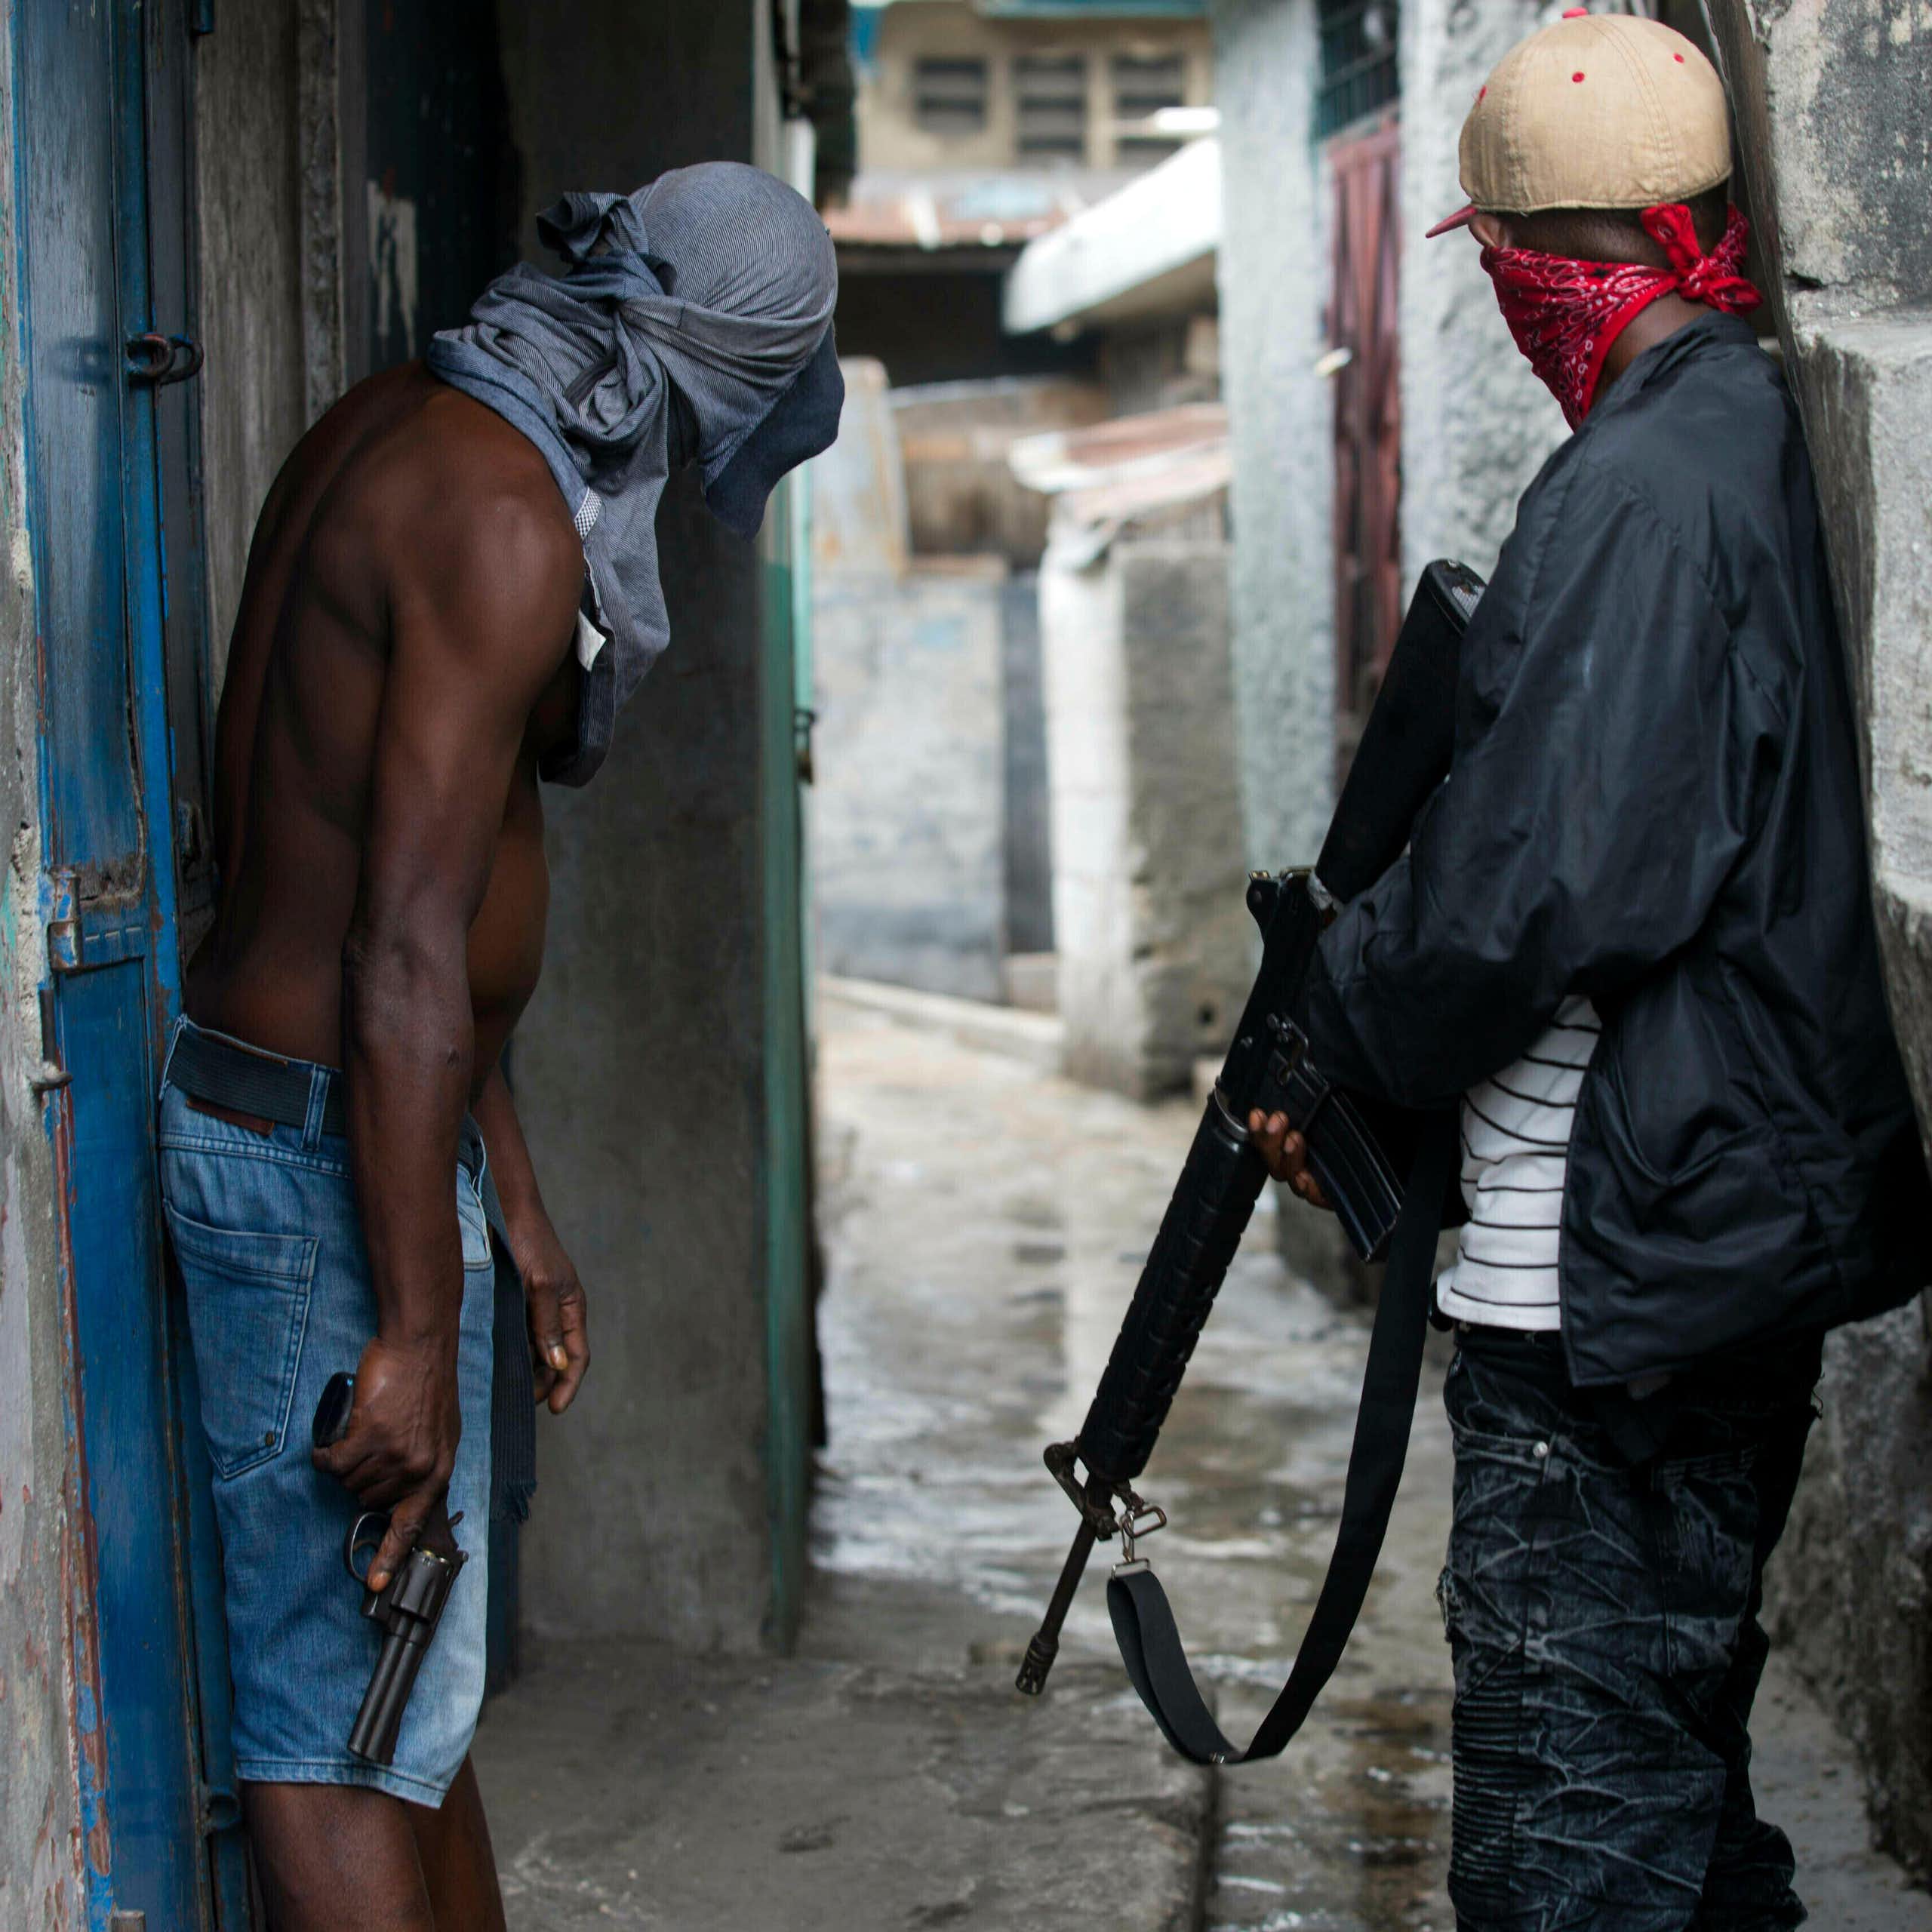 Two men peering down an alleyway holding guns and with their faces covered.